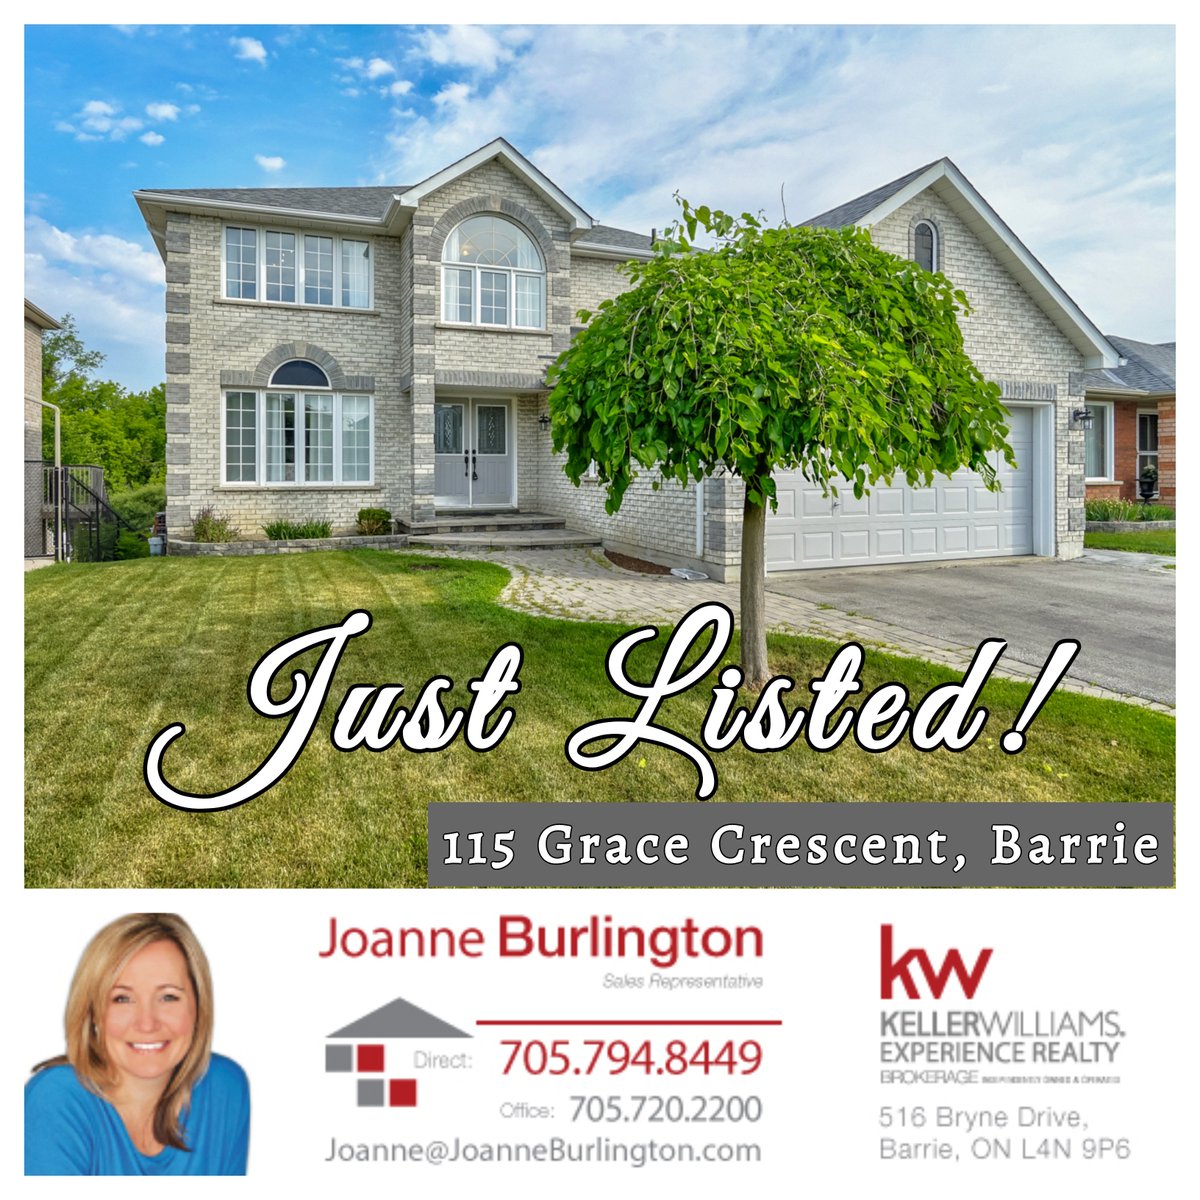 Just Listed!
115 Grace Crescent
#JoanneBurlingtonRealEstate #Barrie #ForSale #RavineLot #IncomePotential #WalkOut #PerfectforExtendedFamily #GreatLocation #KellerWilliamsExperienceRealty #KW